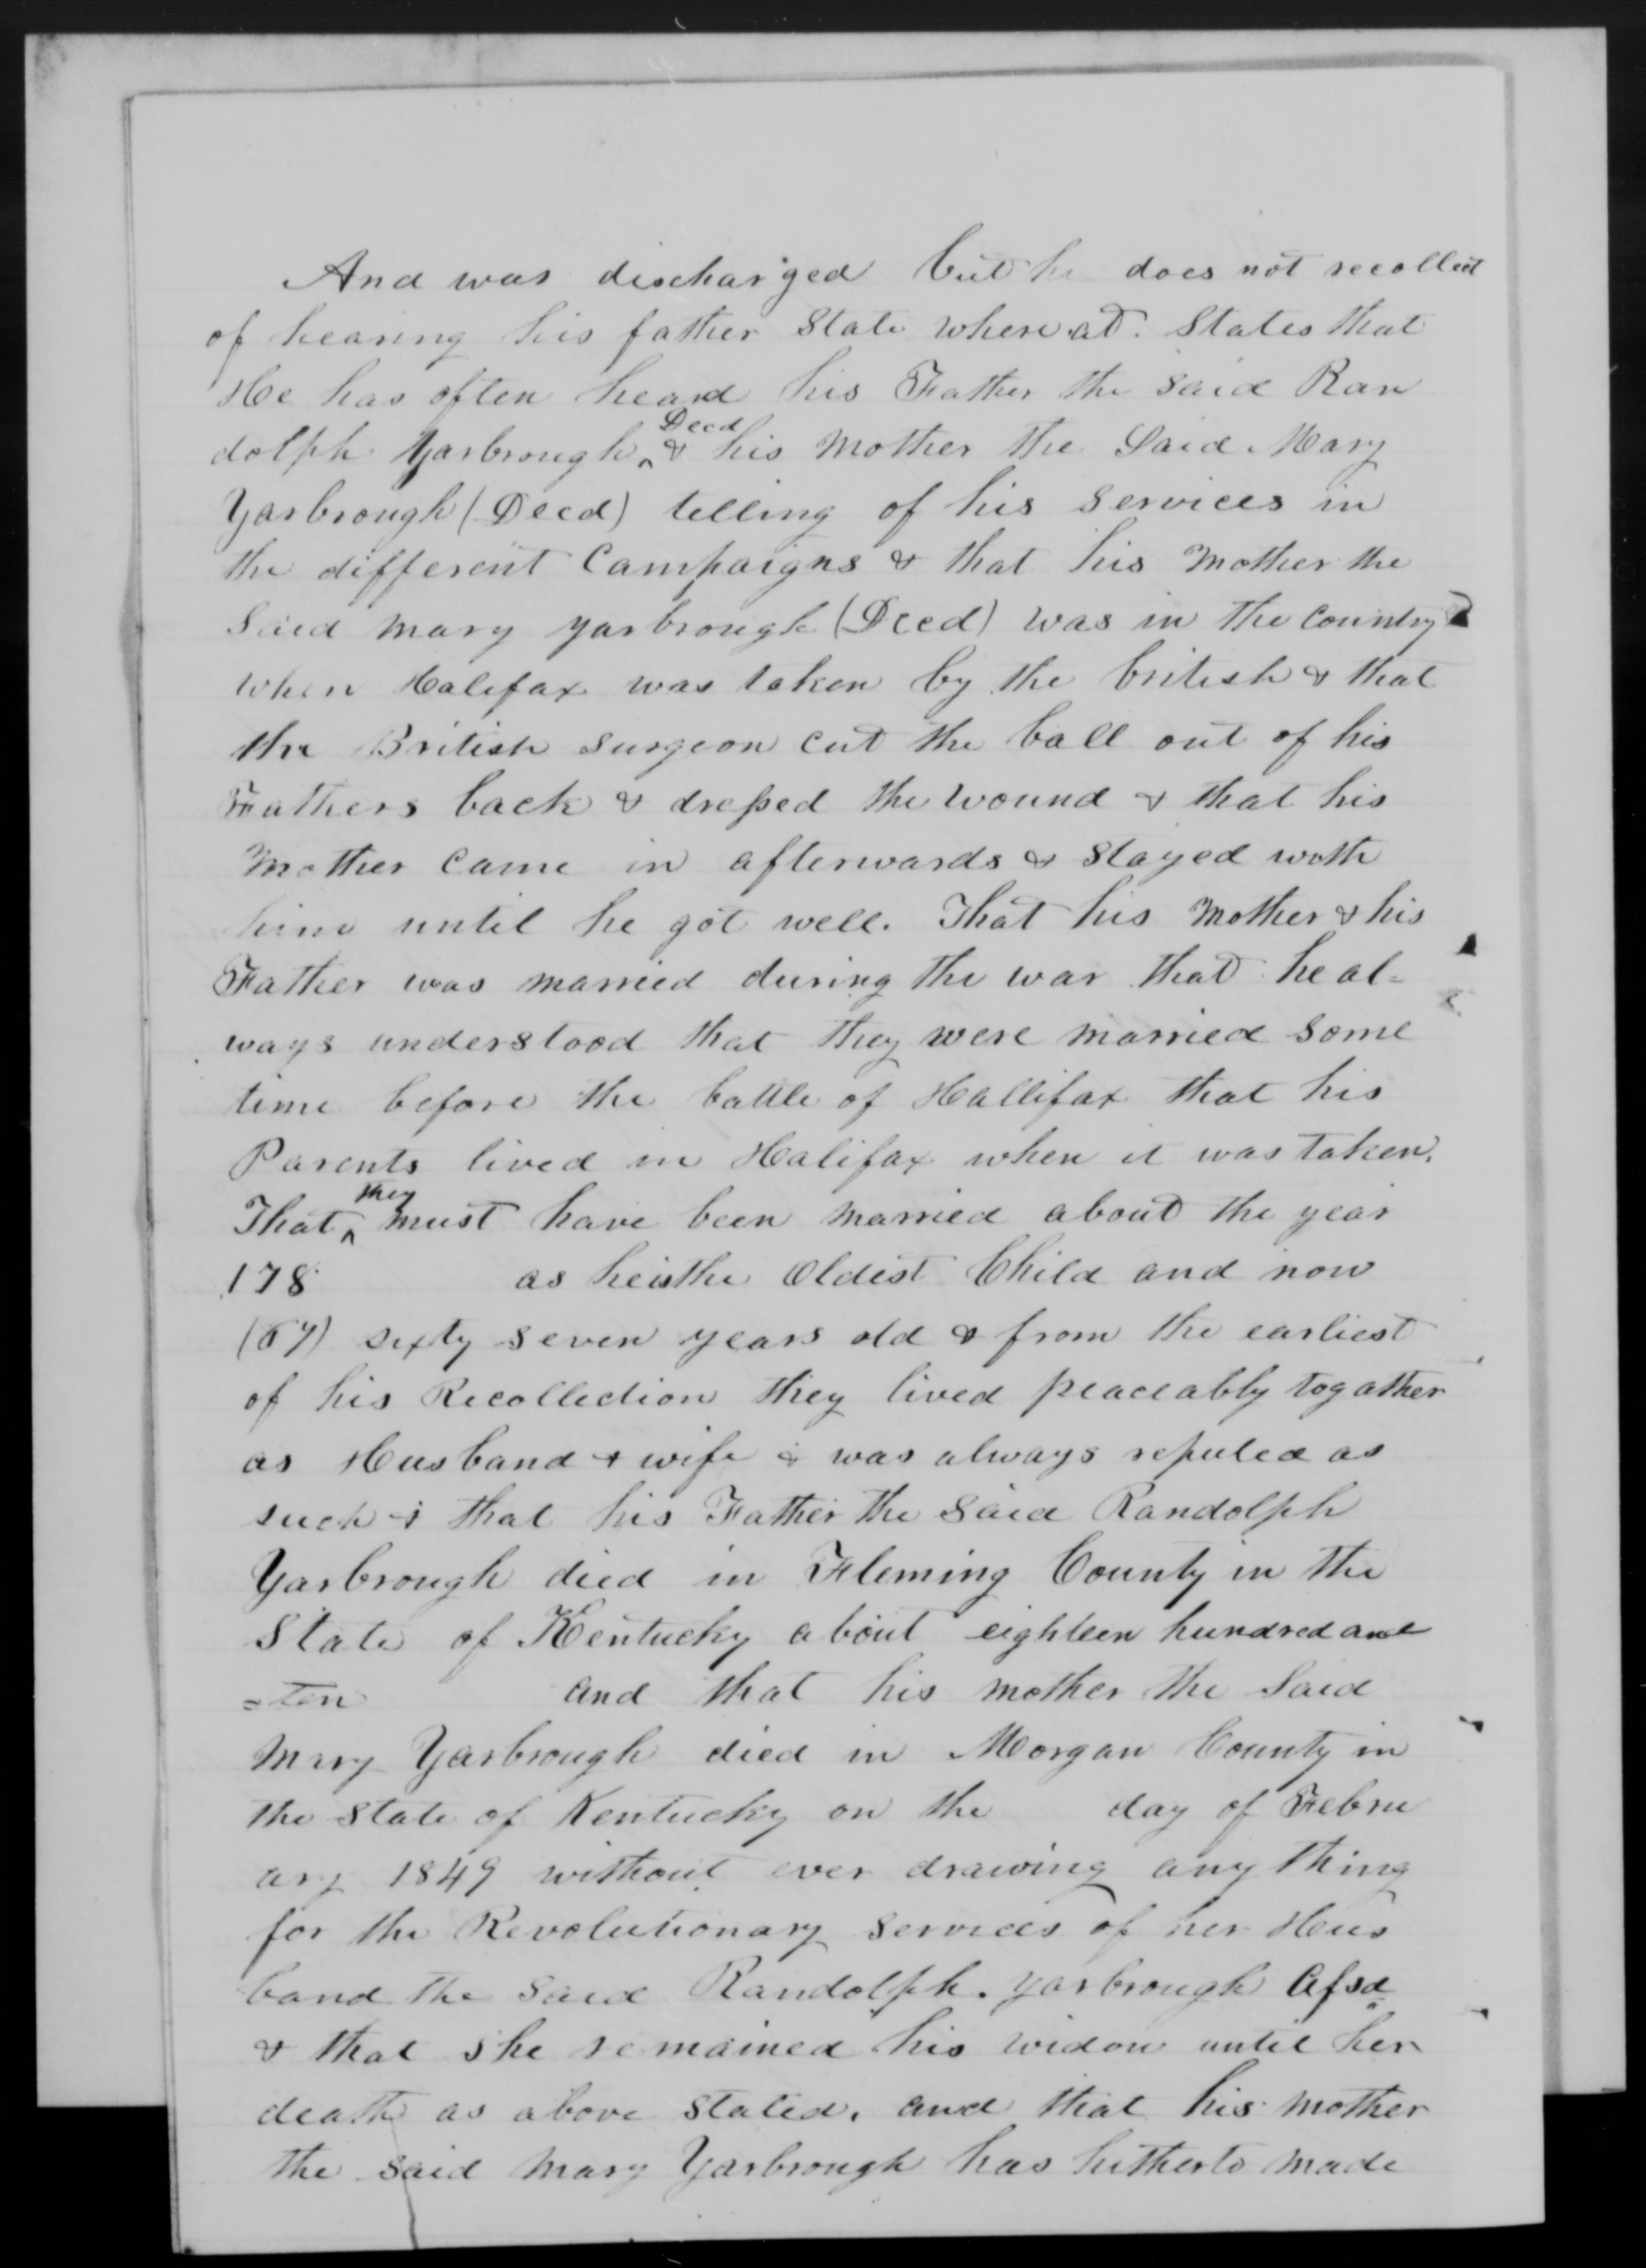 Affidavit of Thomas Yarborough in support of a Pension Claim for Mary Yarborough, 27 April 1852, page 2